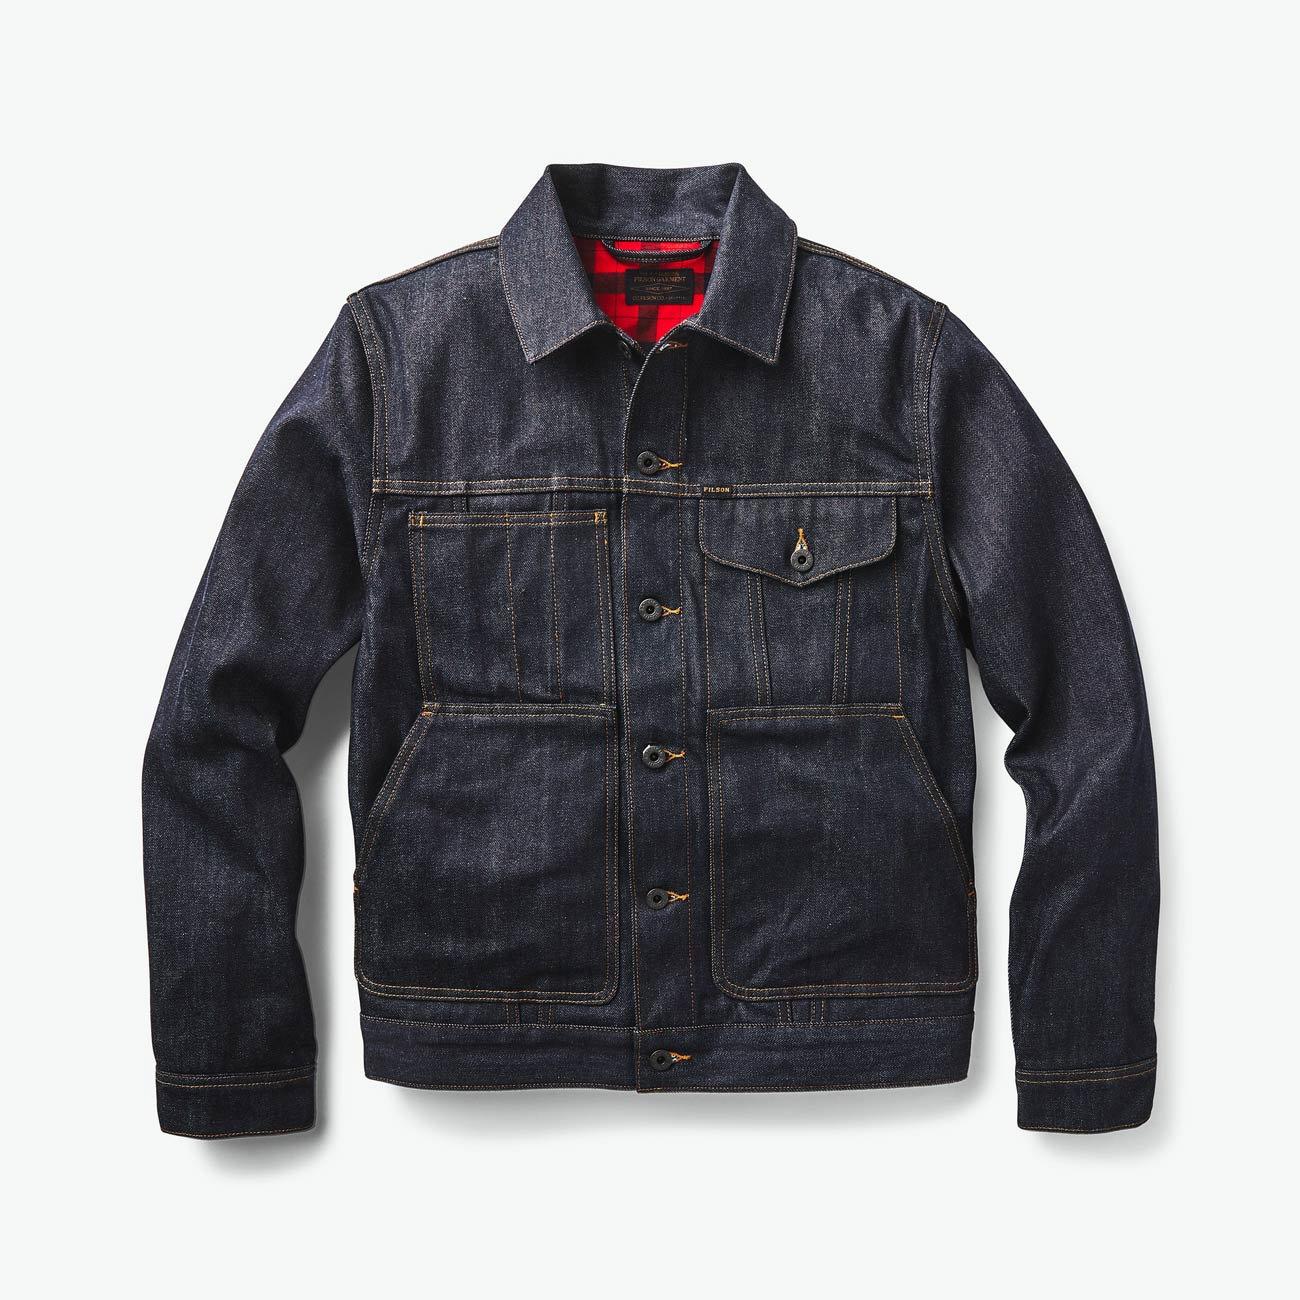 Filson Introduces ‘Raw Indigo’ Cruiser Jacket Made With Denim From The ...